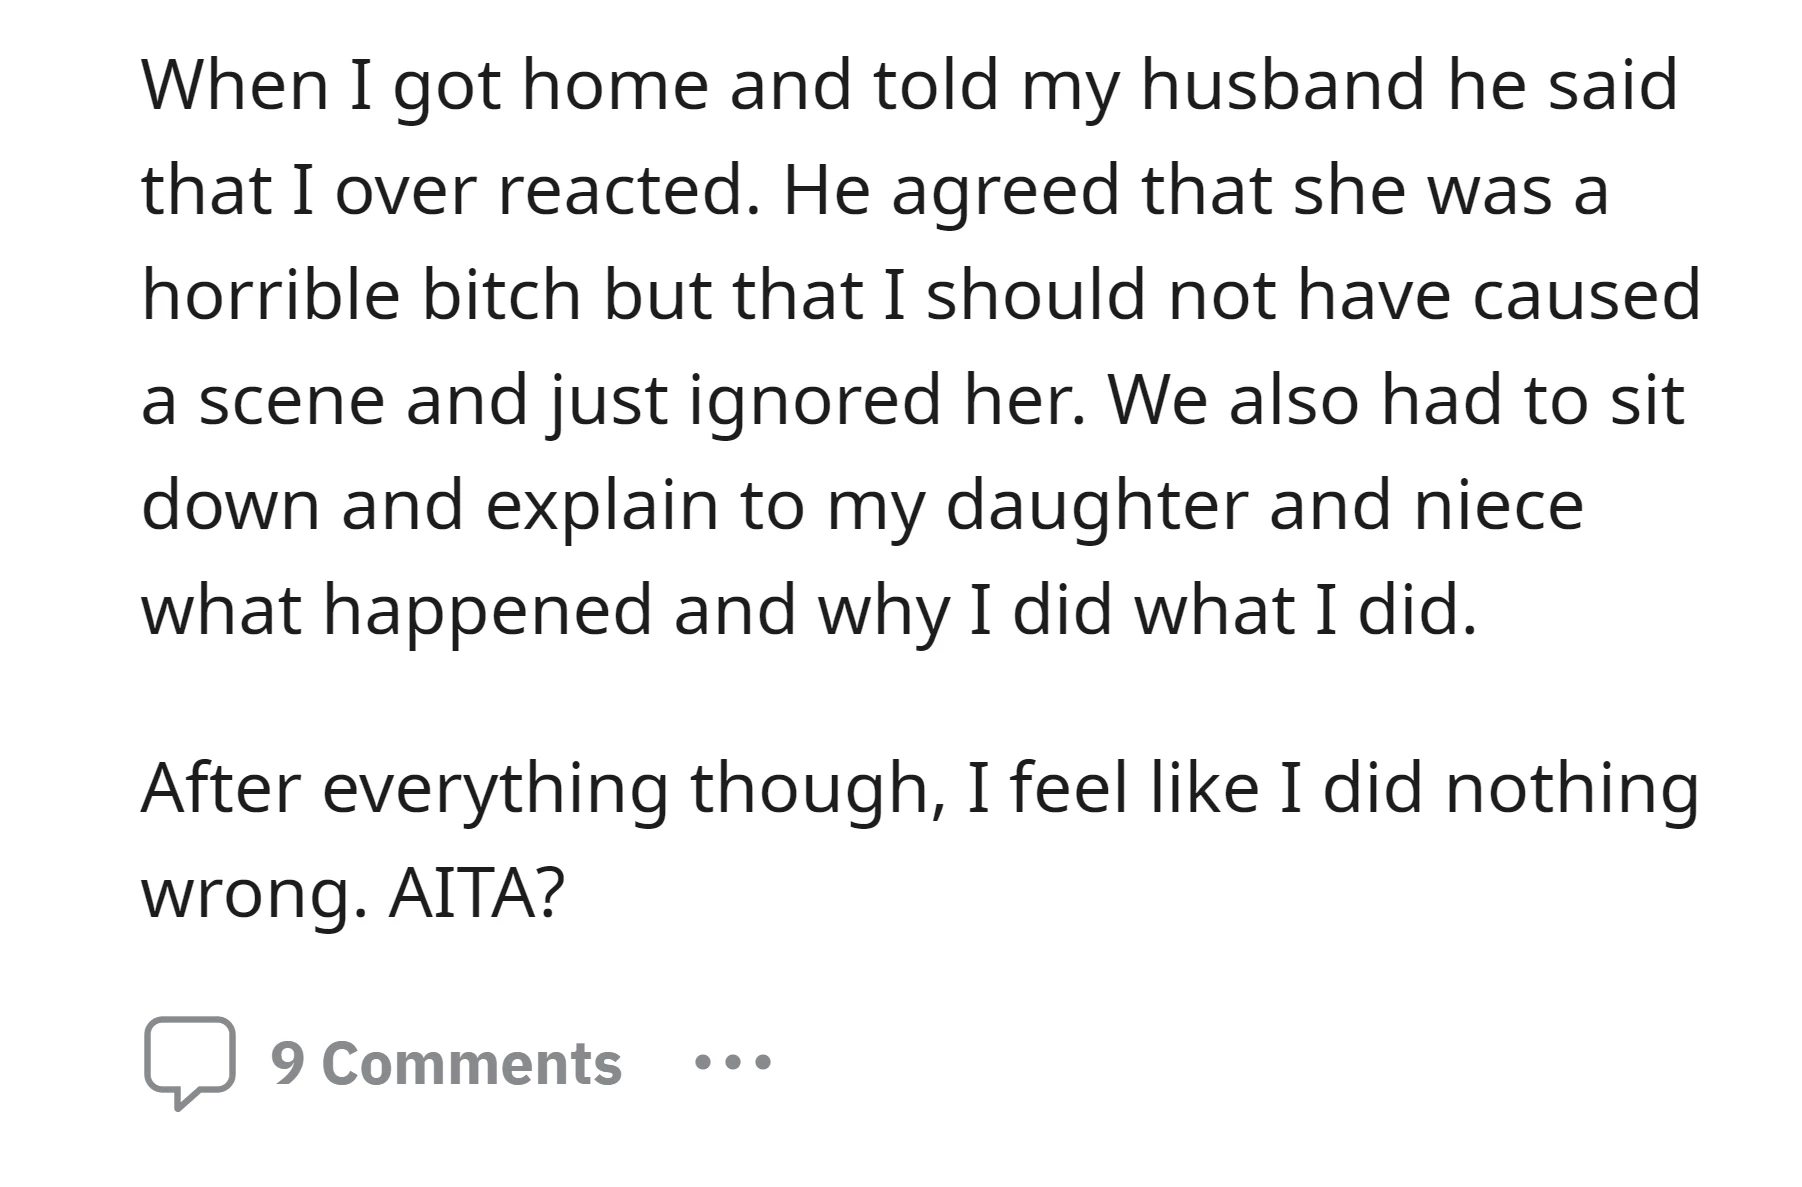 OP told her husband about it and he thought she overreacted